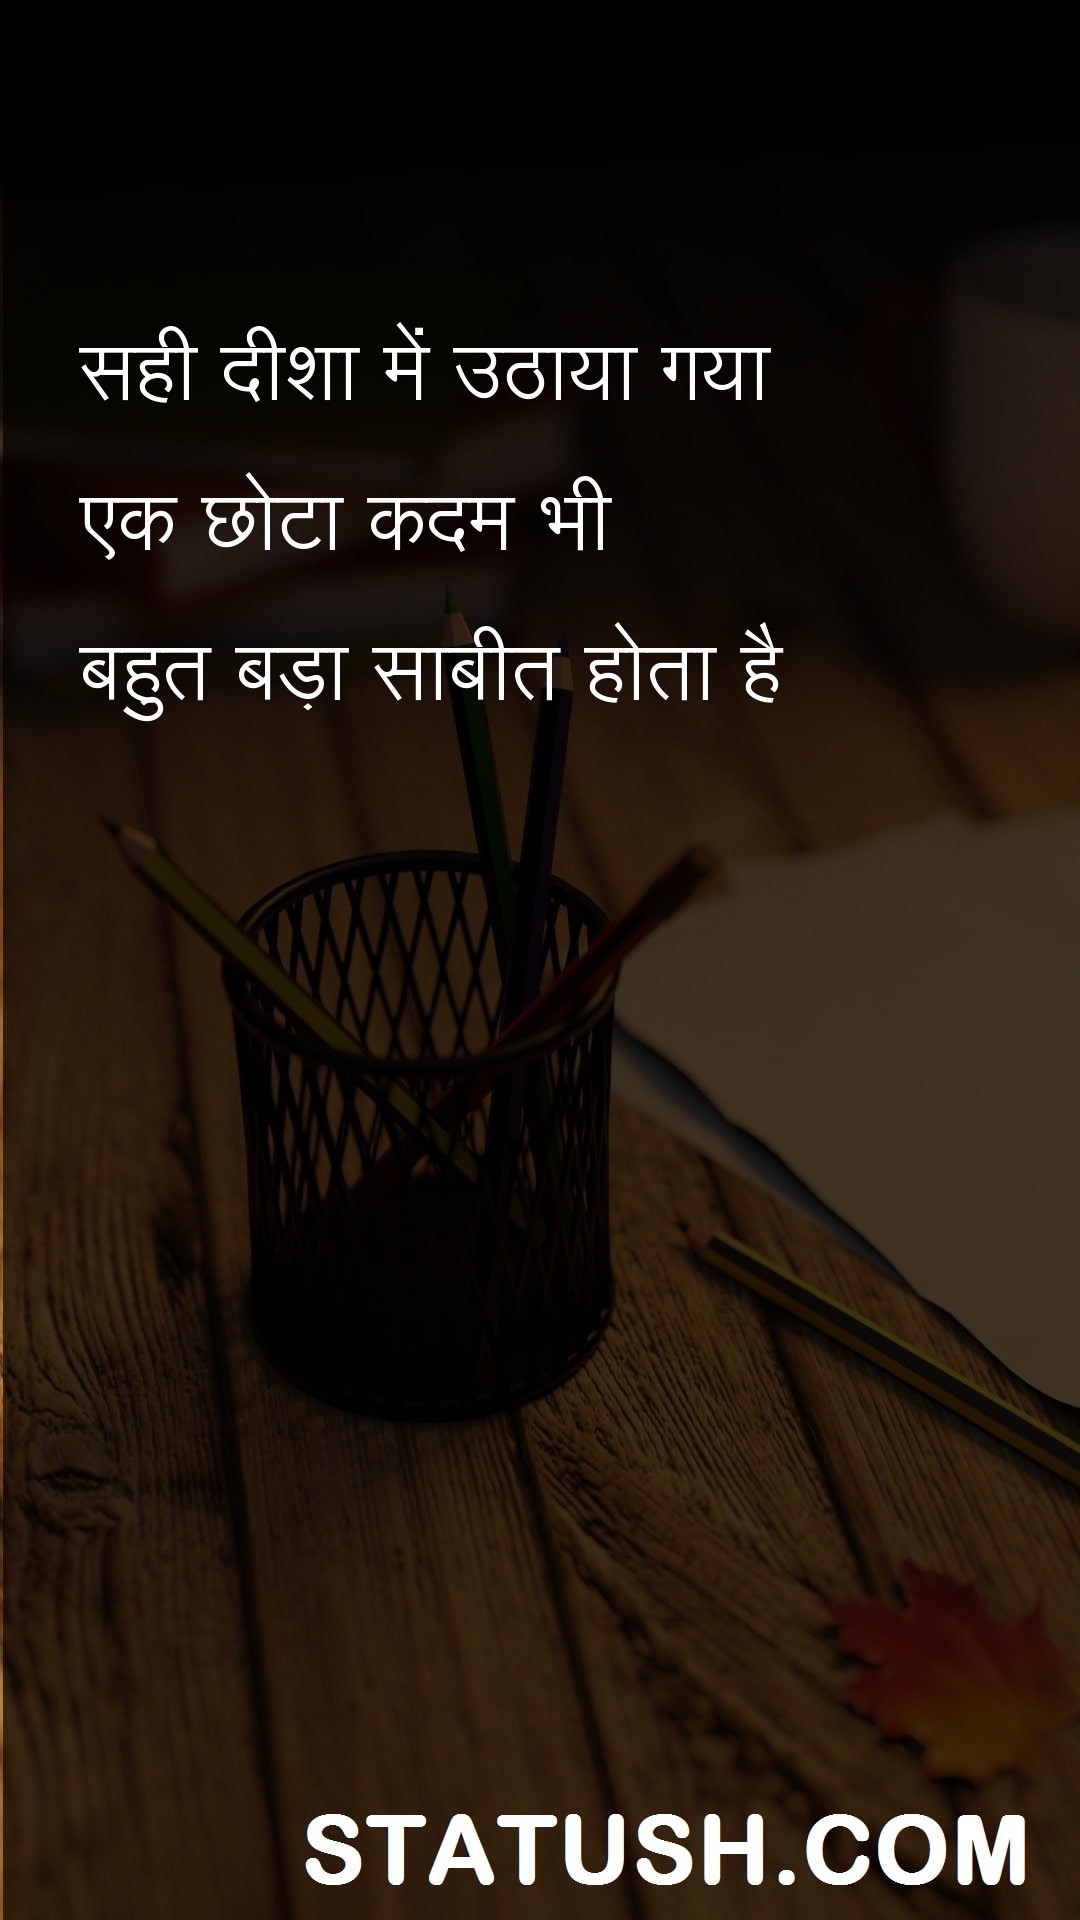 Even a small step in the right Hindi Quotes at statush.com